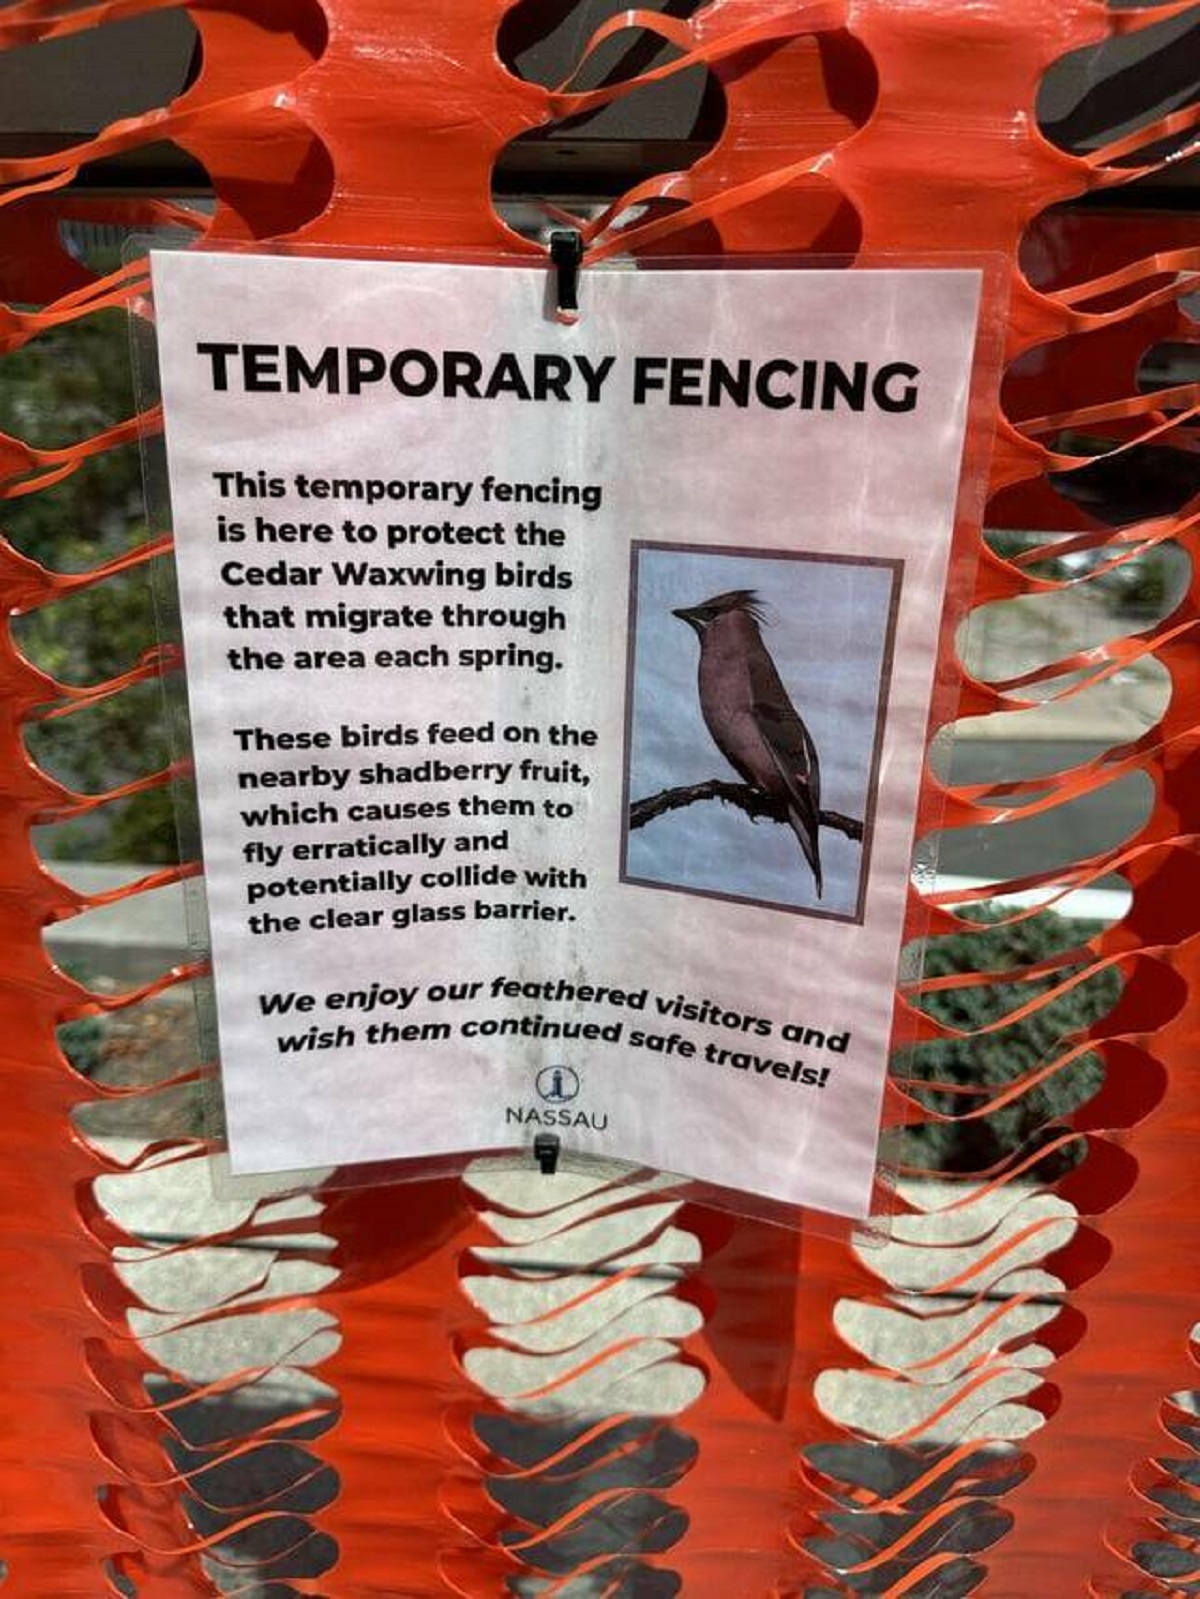 "This sign for temporary fencing to protect birds"